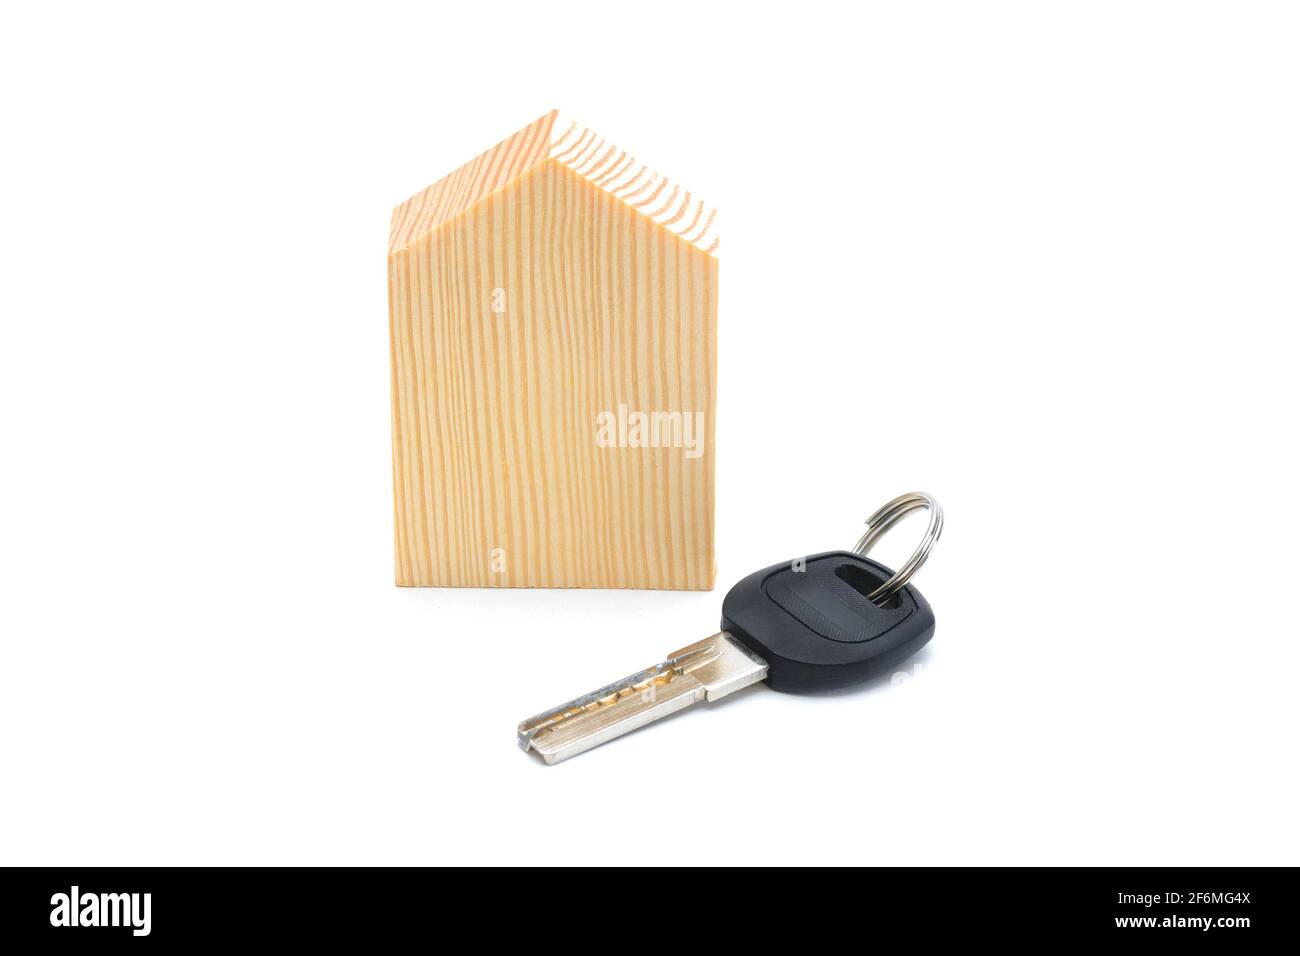 Apartment key and wooden model of house. Isolated over white background. Concept of new housing, mortgage, housewarming. Stock Photo